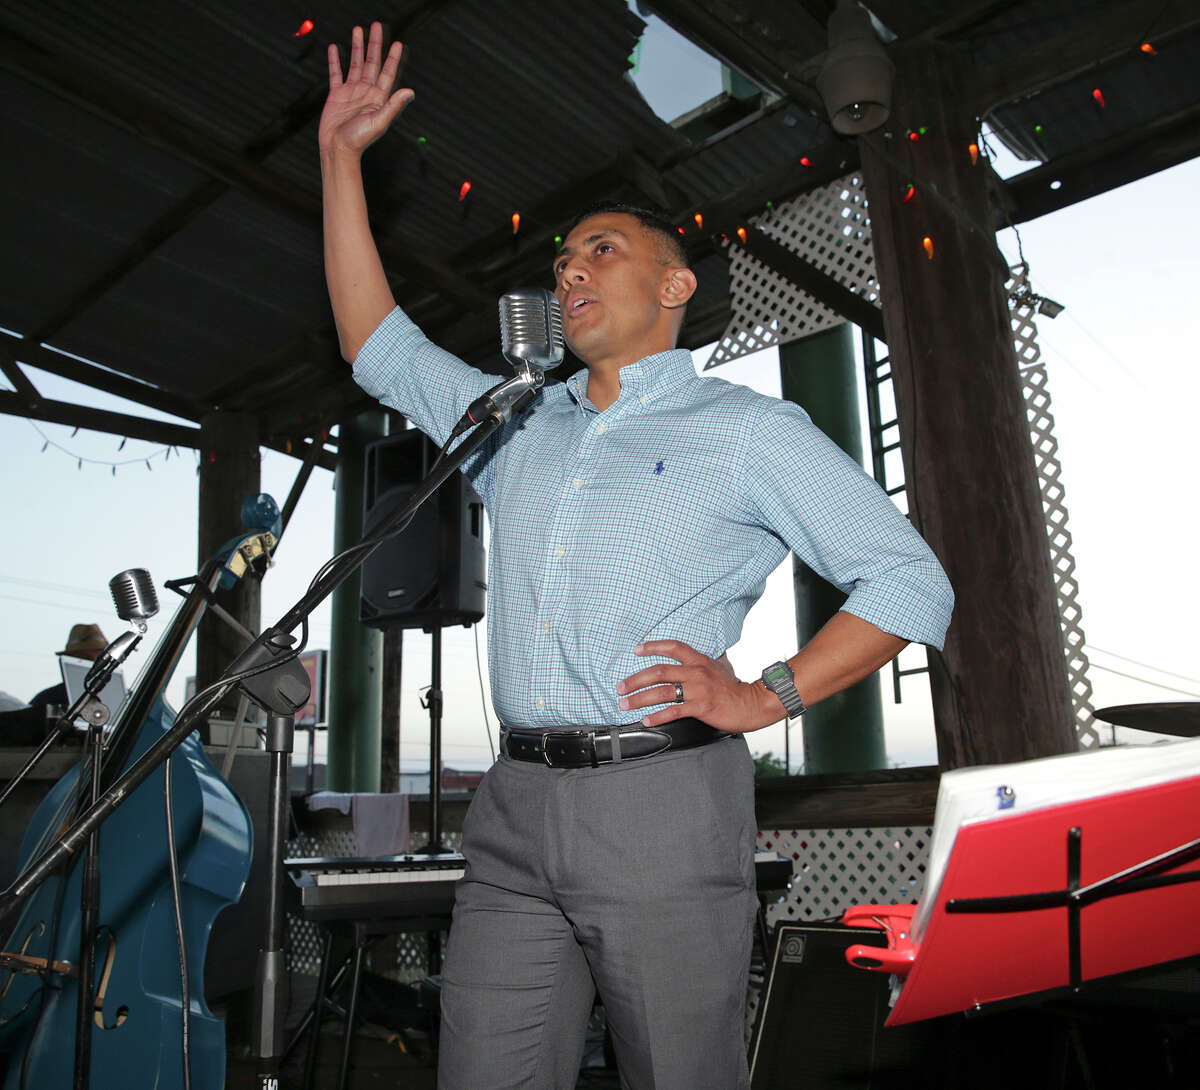 District 7 runoff candidate Cris Medina waves to supporters and makes his victory claim after he arrives to greet supporters at Fatso's Sports Garden to begin an election night party on June 13, 2015.